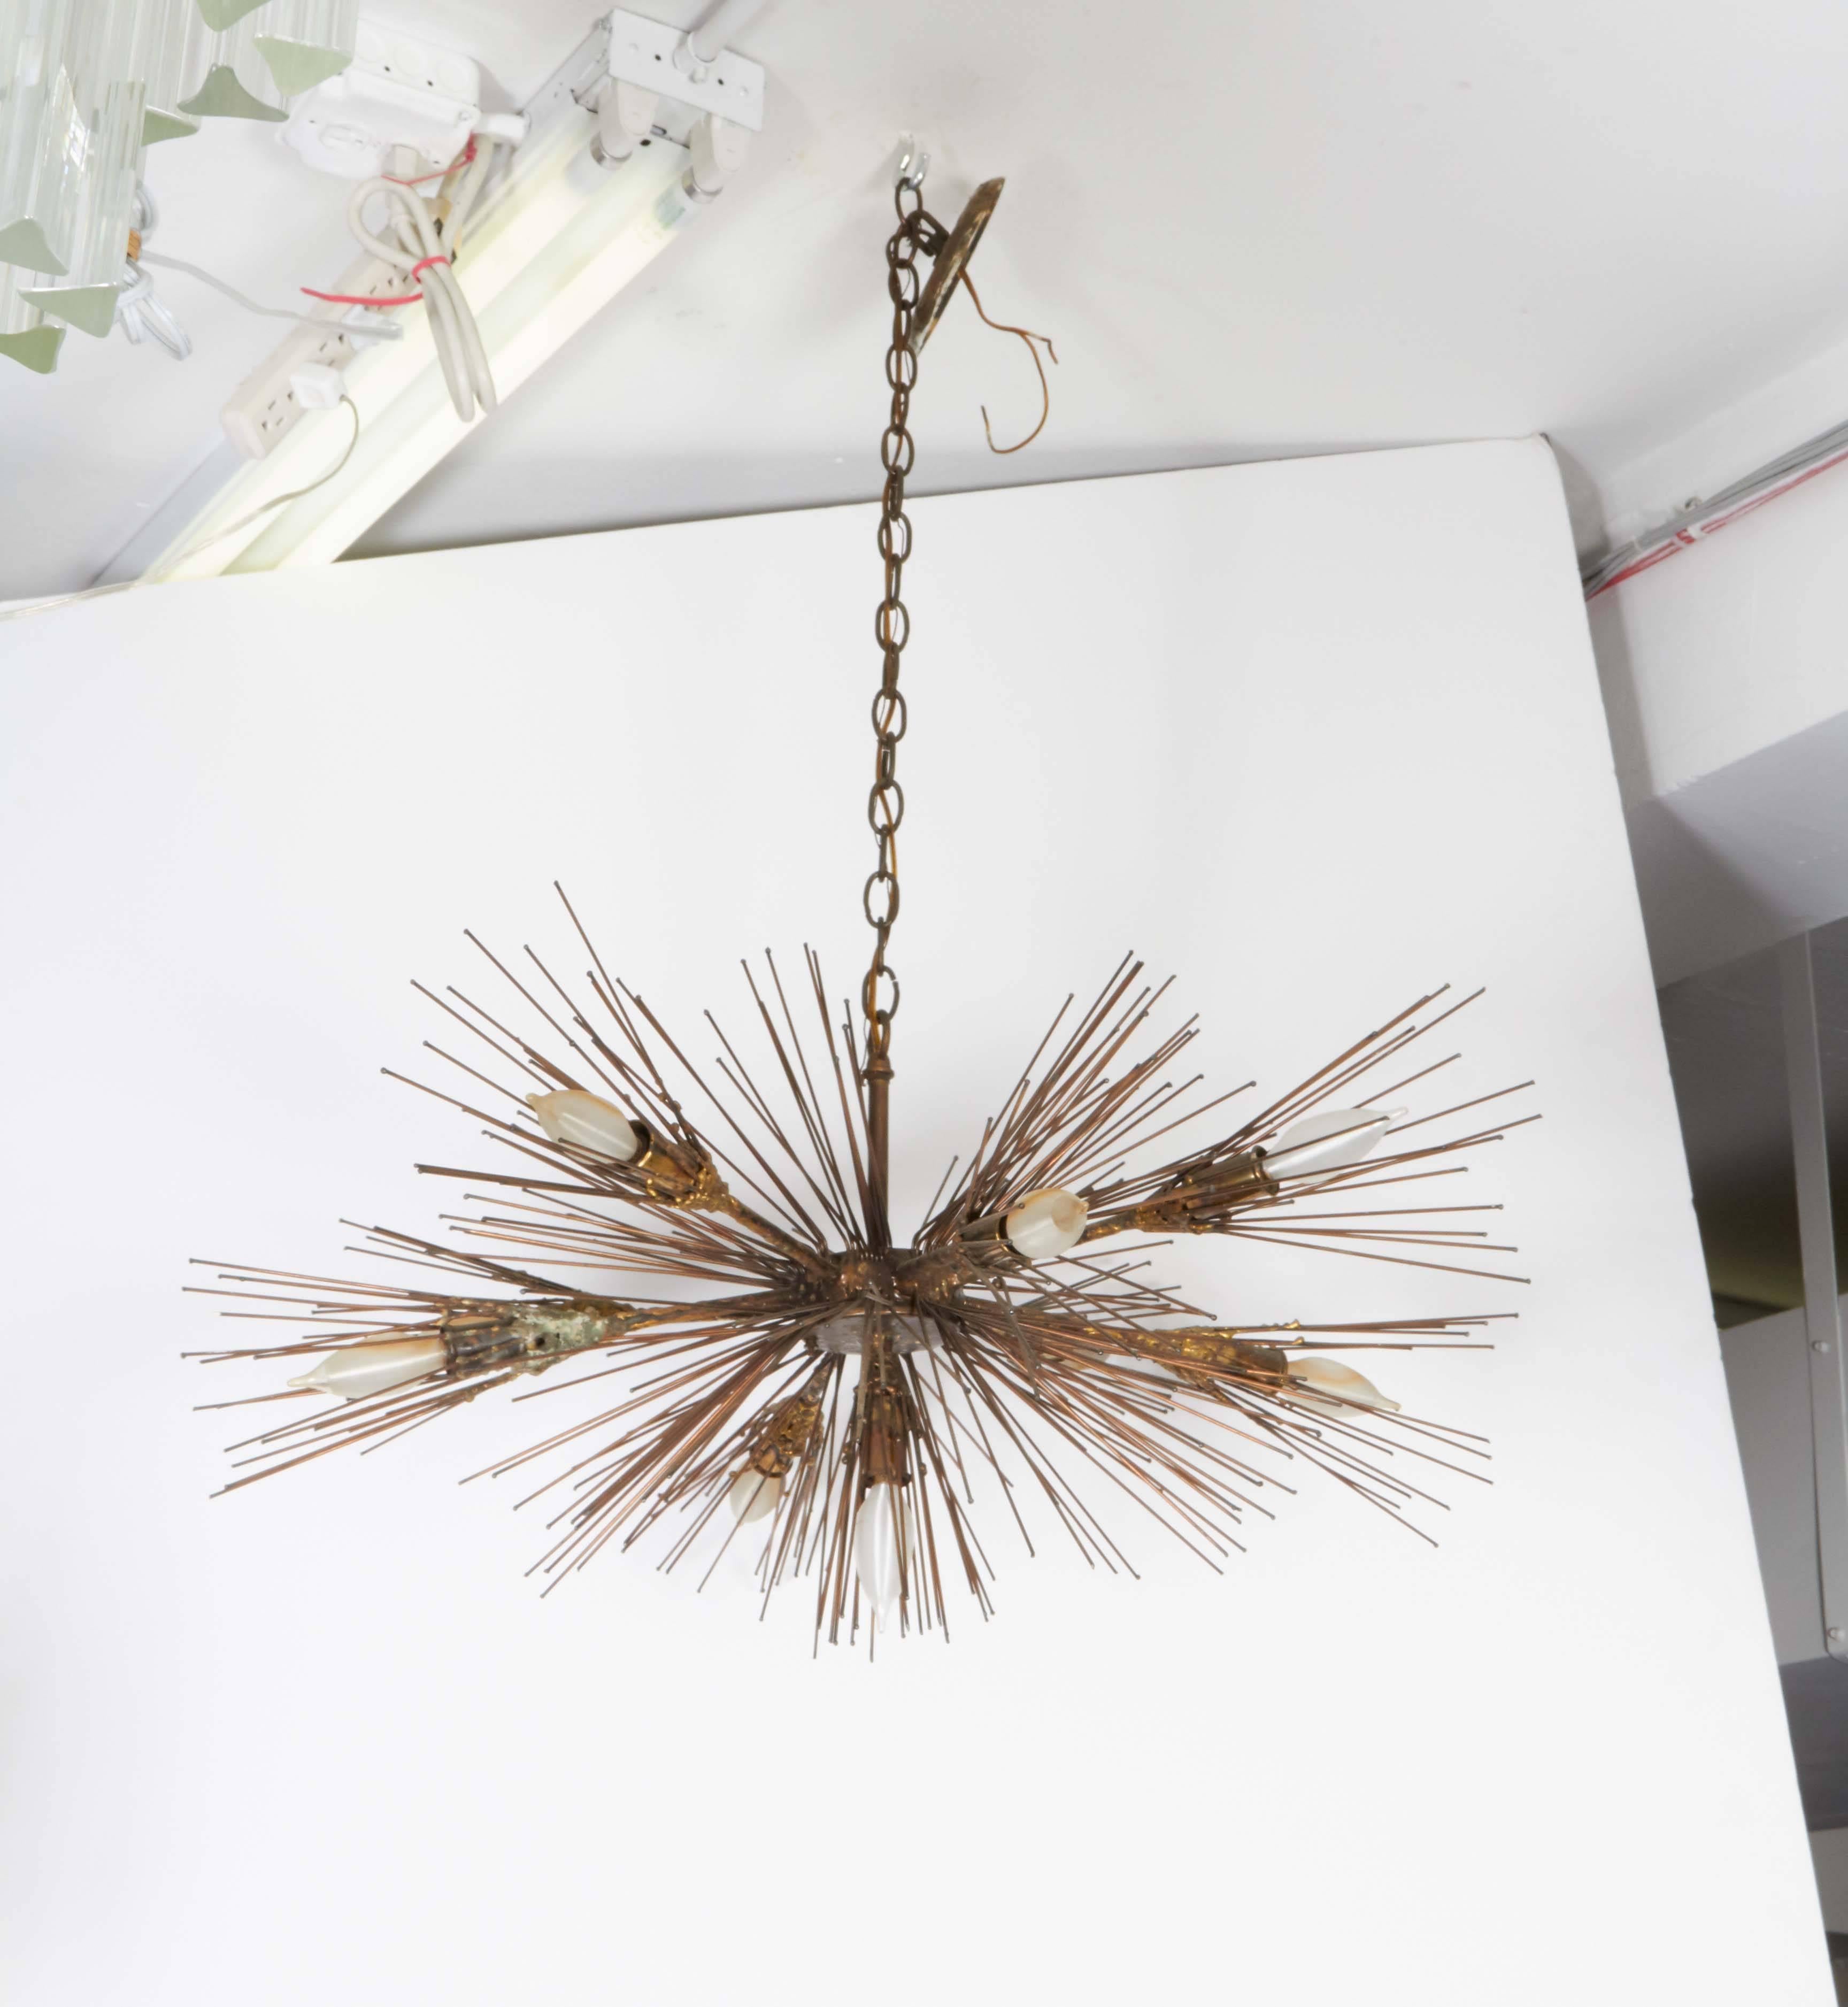 A Mid-Century Modern era urchin Sputnik chandelier, manufactured by the Feldman Company, crafted of soldered metal spires with gilding and verdigris finish. Includes original manufacturer's label. Very good vintage condition, wear consistent with